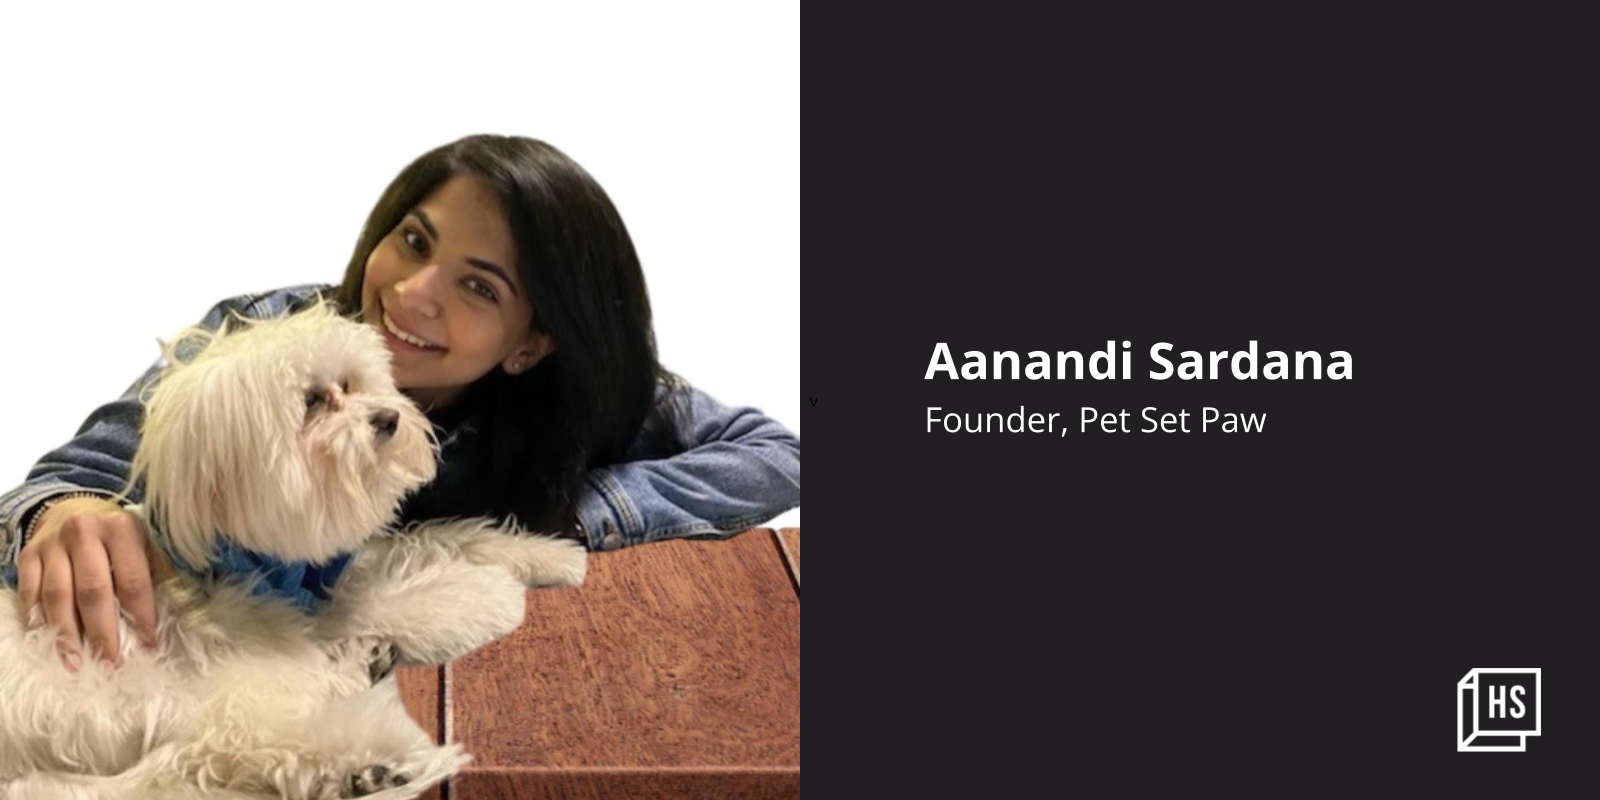 This 22-yr-old woman entrepreneur wants to bring pet-care services to the doorstep